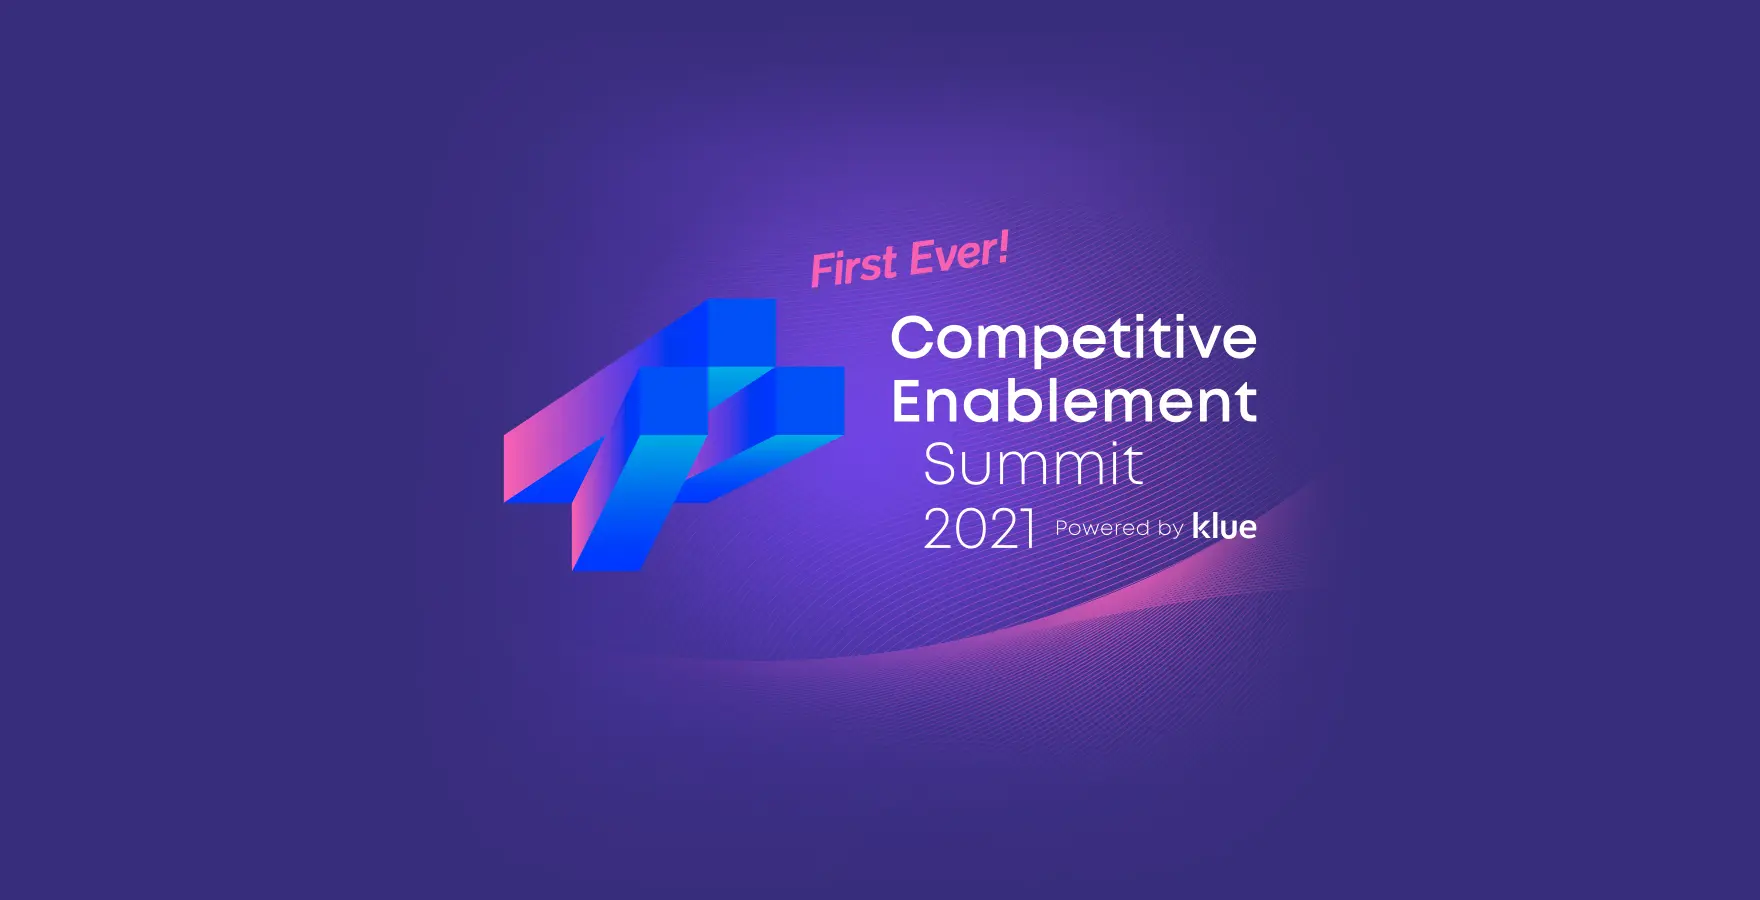 The-first-ever-Competitive-Enablement-Summit-is-coming.-Heres-what-to-expect_FEATURE